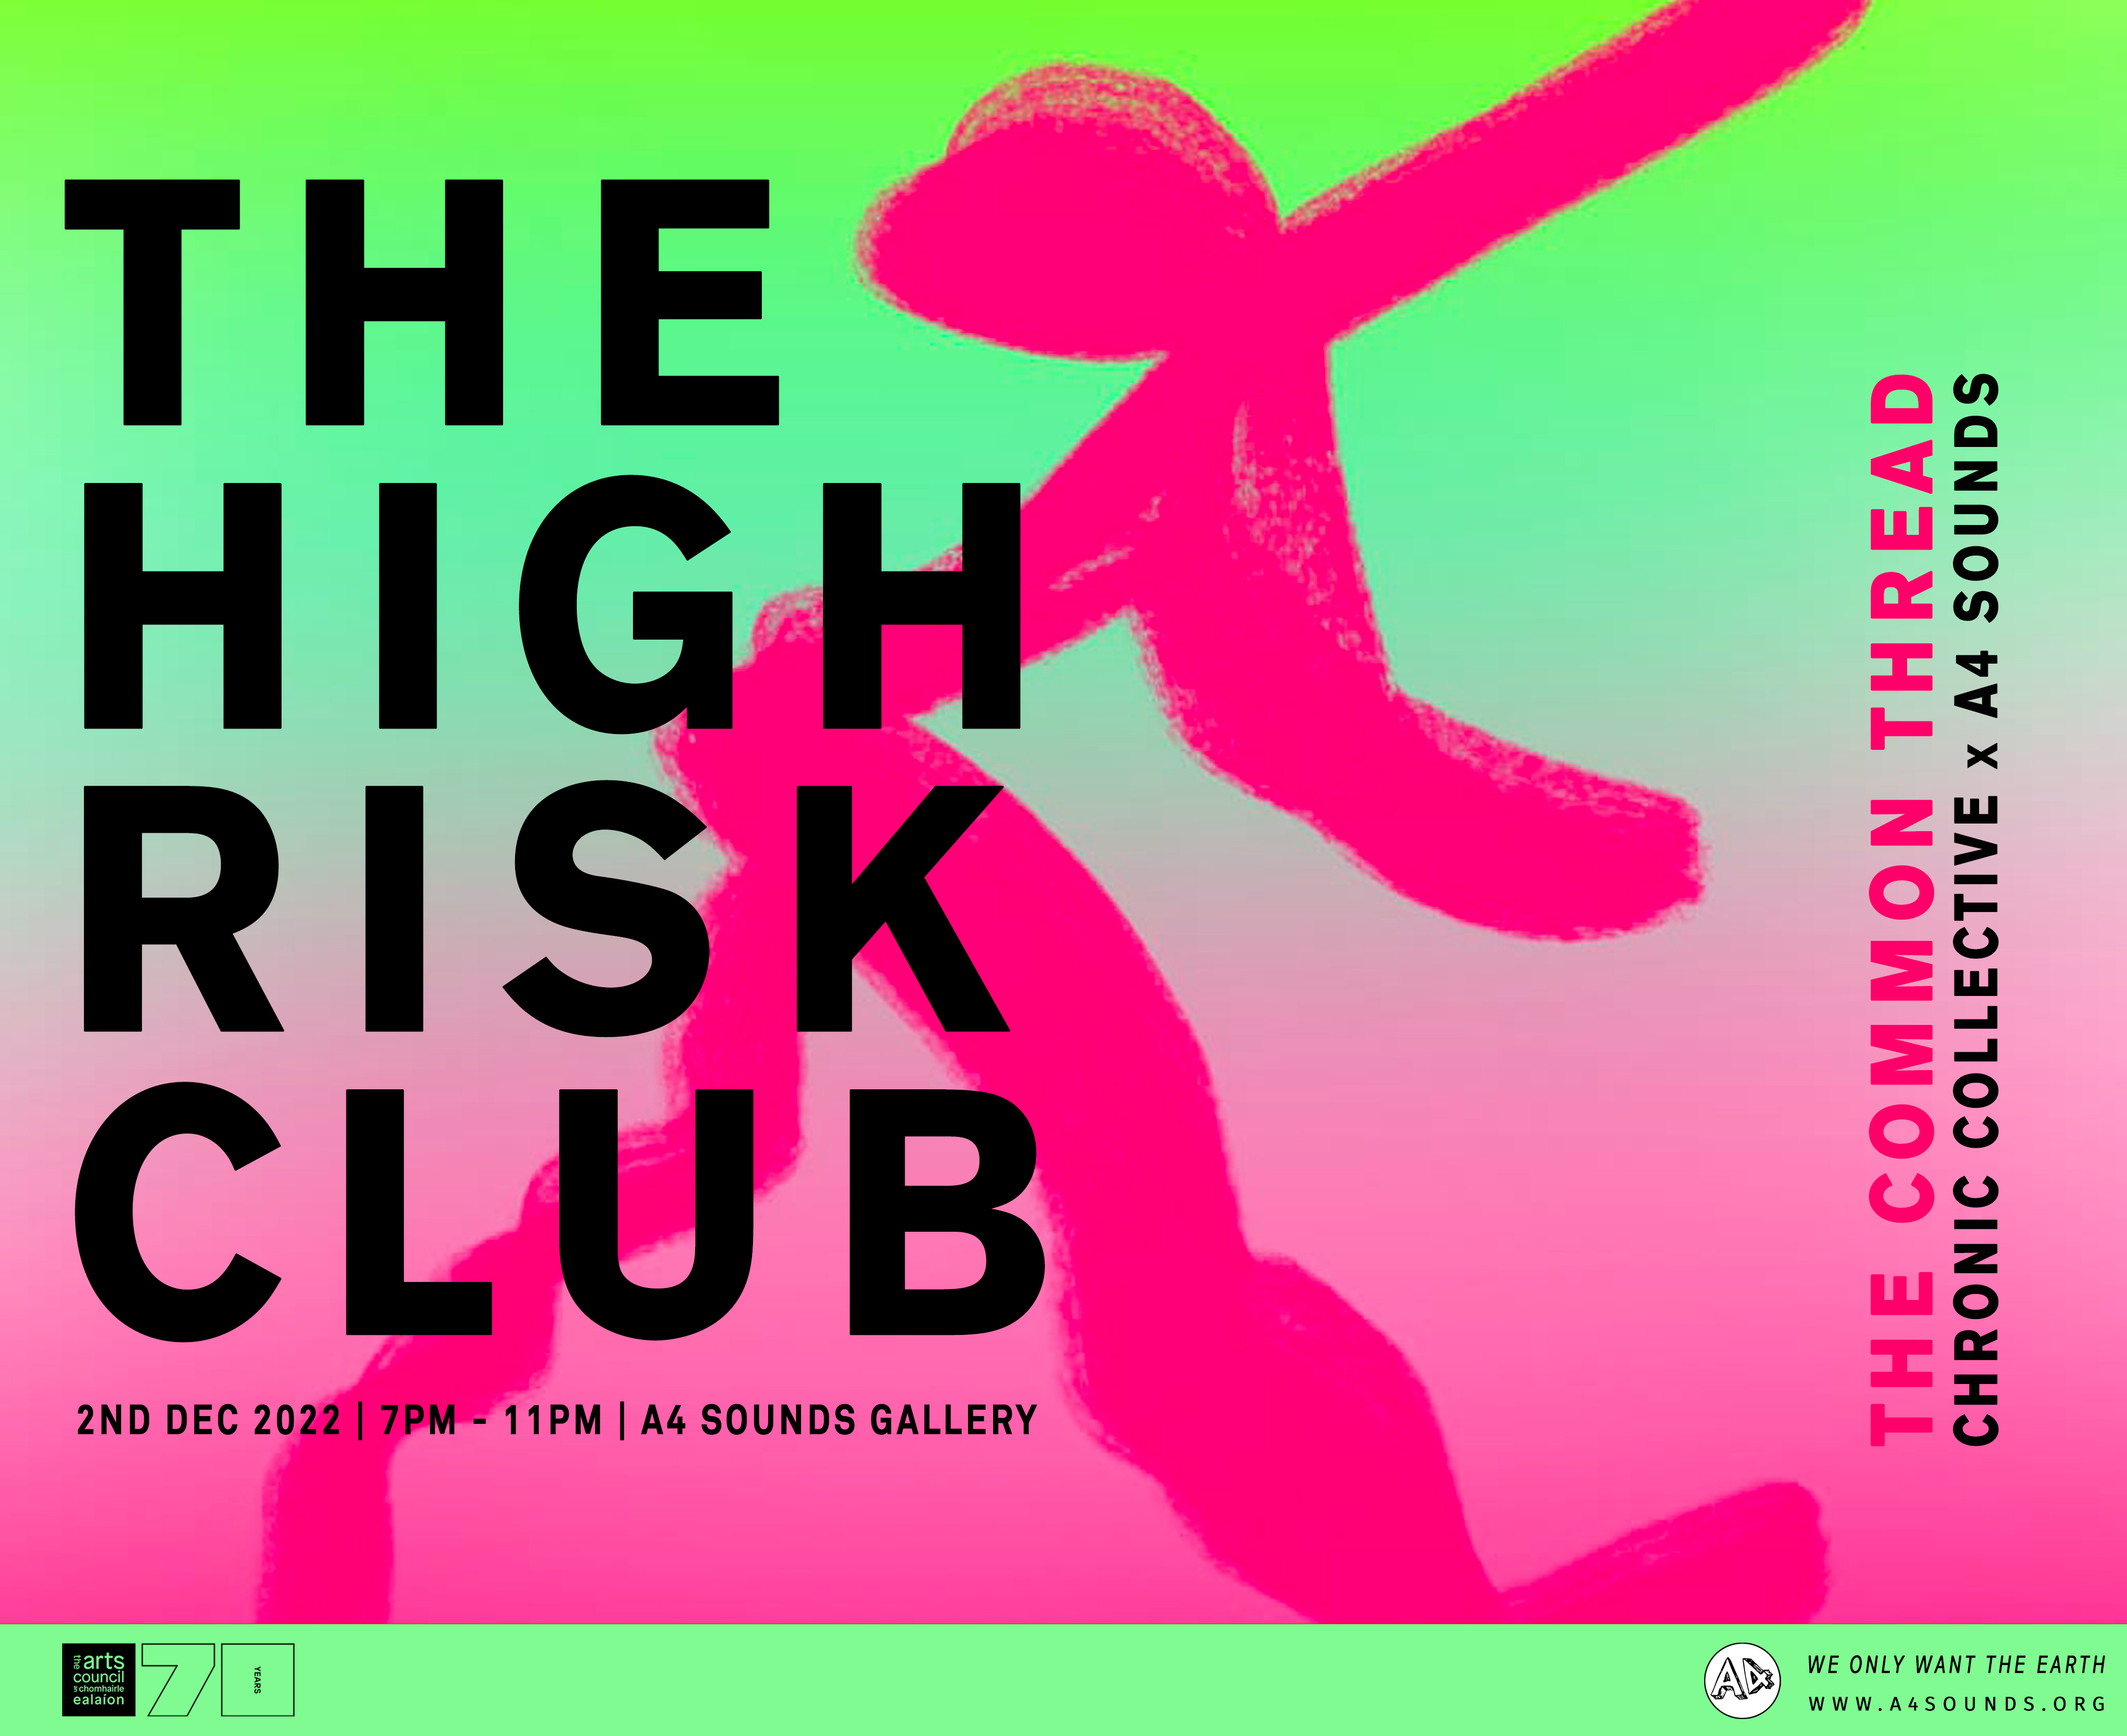 THE HIGH RISK CLUB – 2022 – A4 Sounds